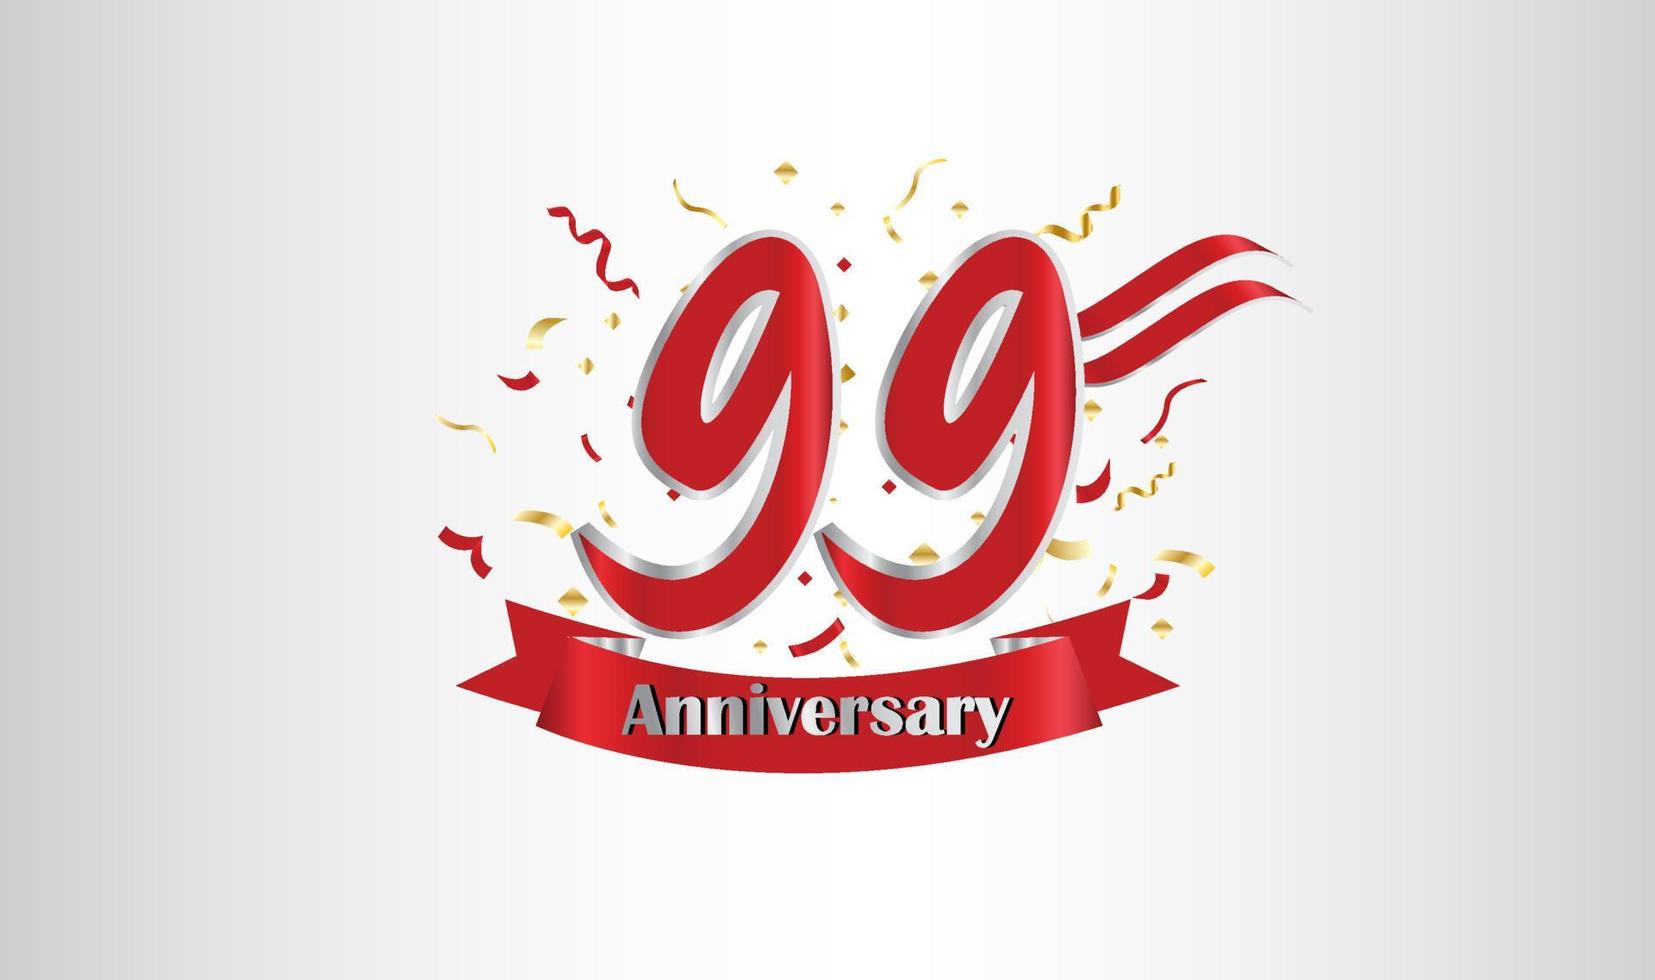 Anniversary celebration background. with the 99th number in gold and with the words golden anniversary celebration. vector